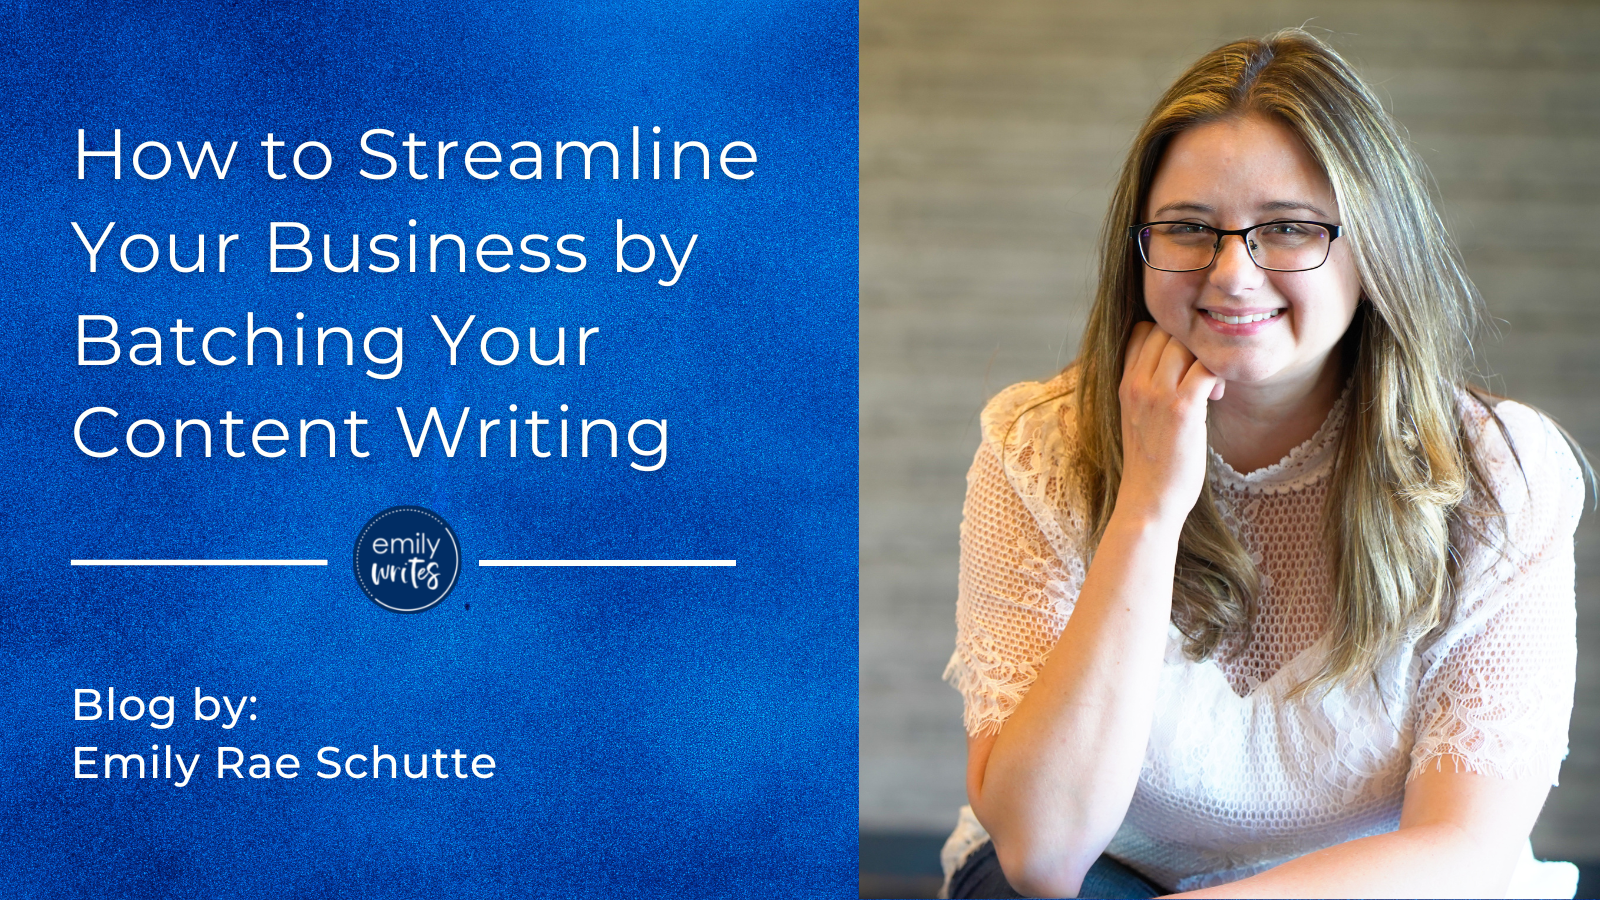 How to Streamline Your Business by Batching Your Content Writing